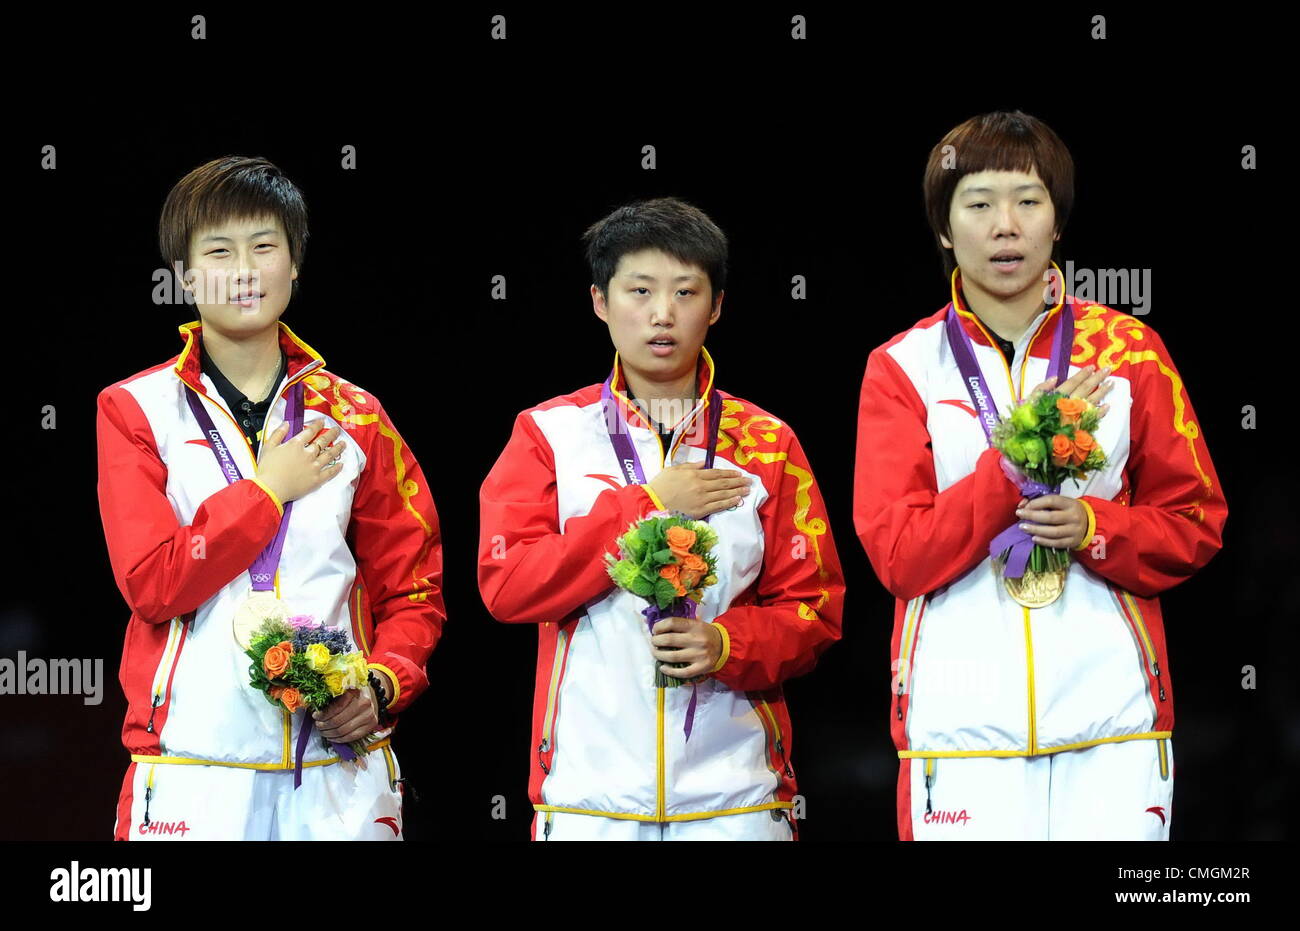 07.08.2012.  London, ENGLAND; Gold medalists Ding Ning, Guo Yue and Li Xiaoxia of China celebrate on the podium during the medal ceremony for the Women's Team Table Tennis on Day 11 of the London 2012 Olympic Games at ExCeL. Stock Photo